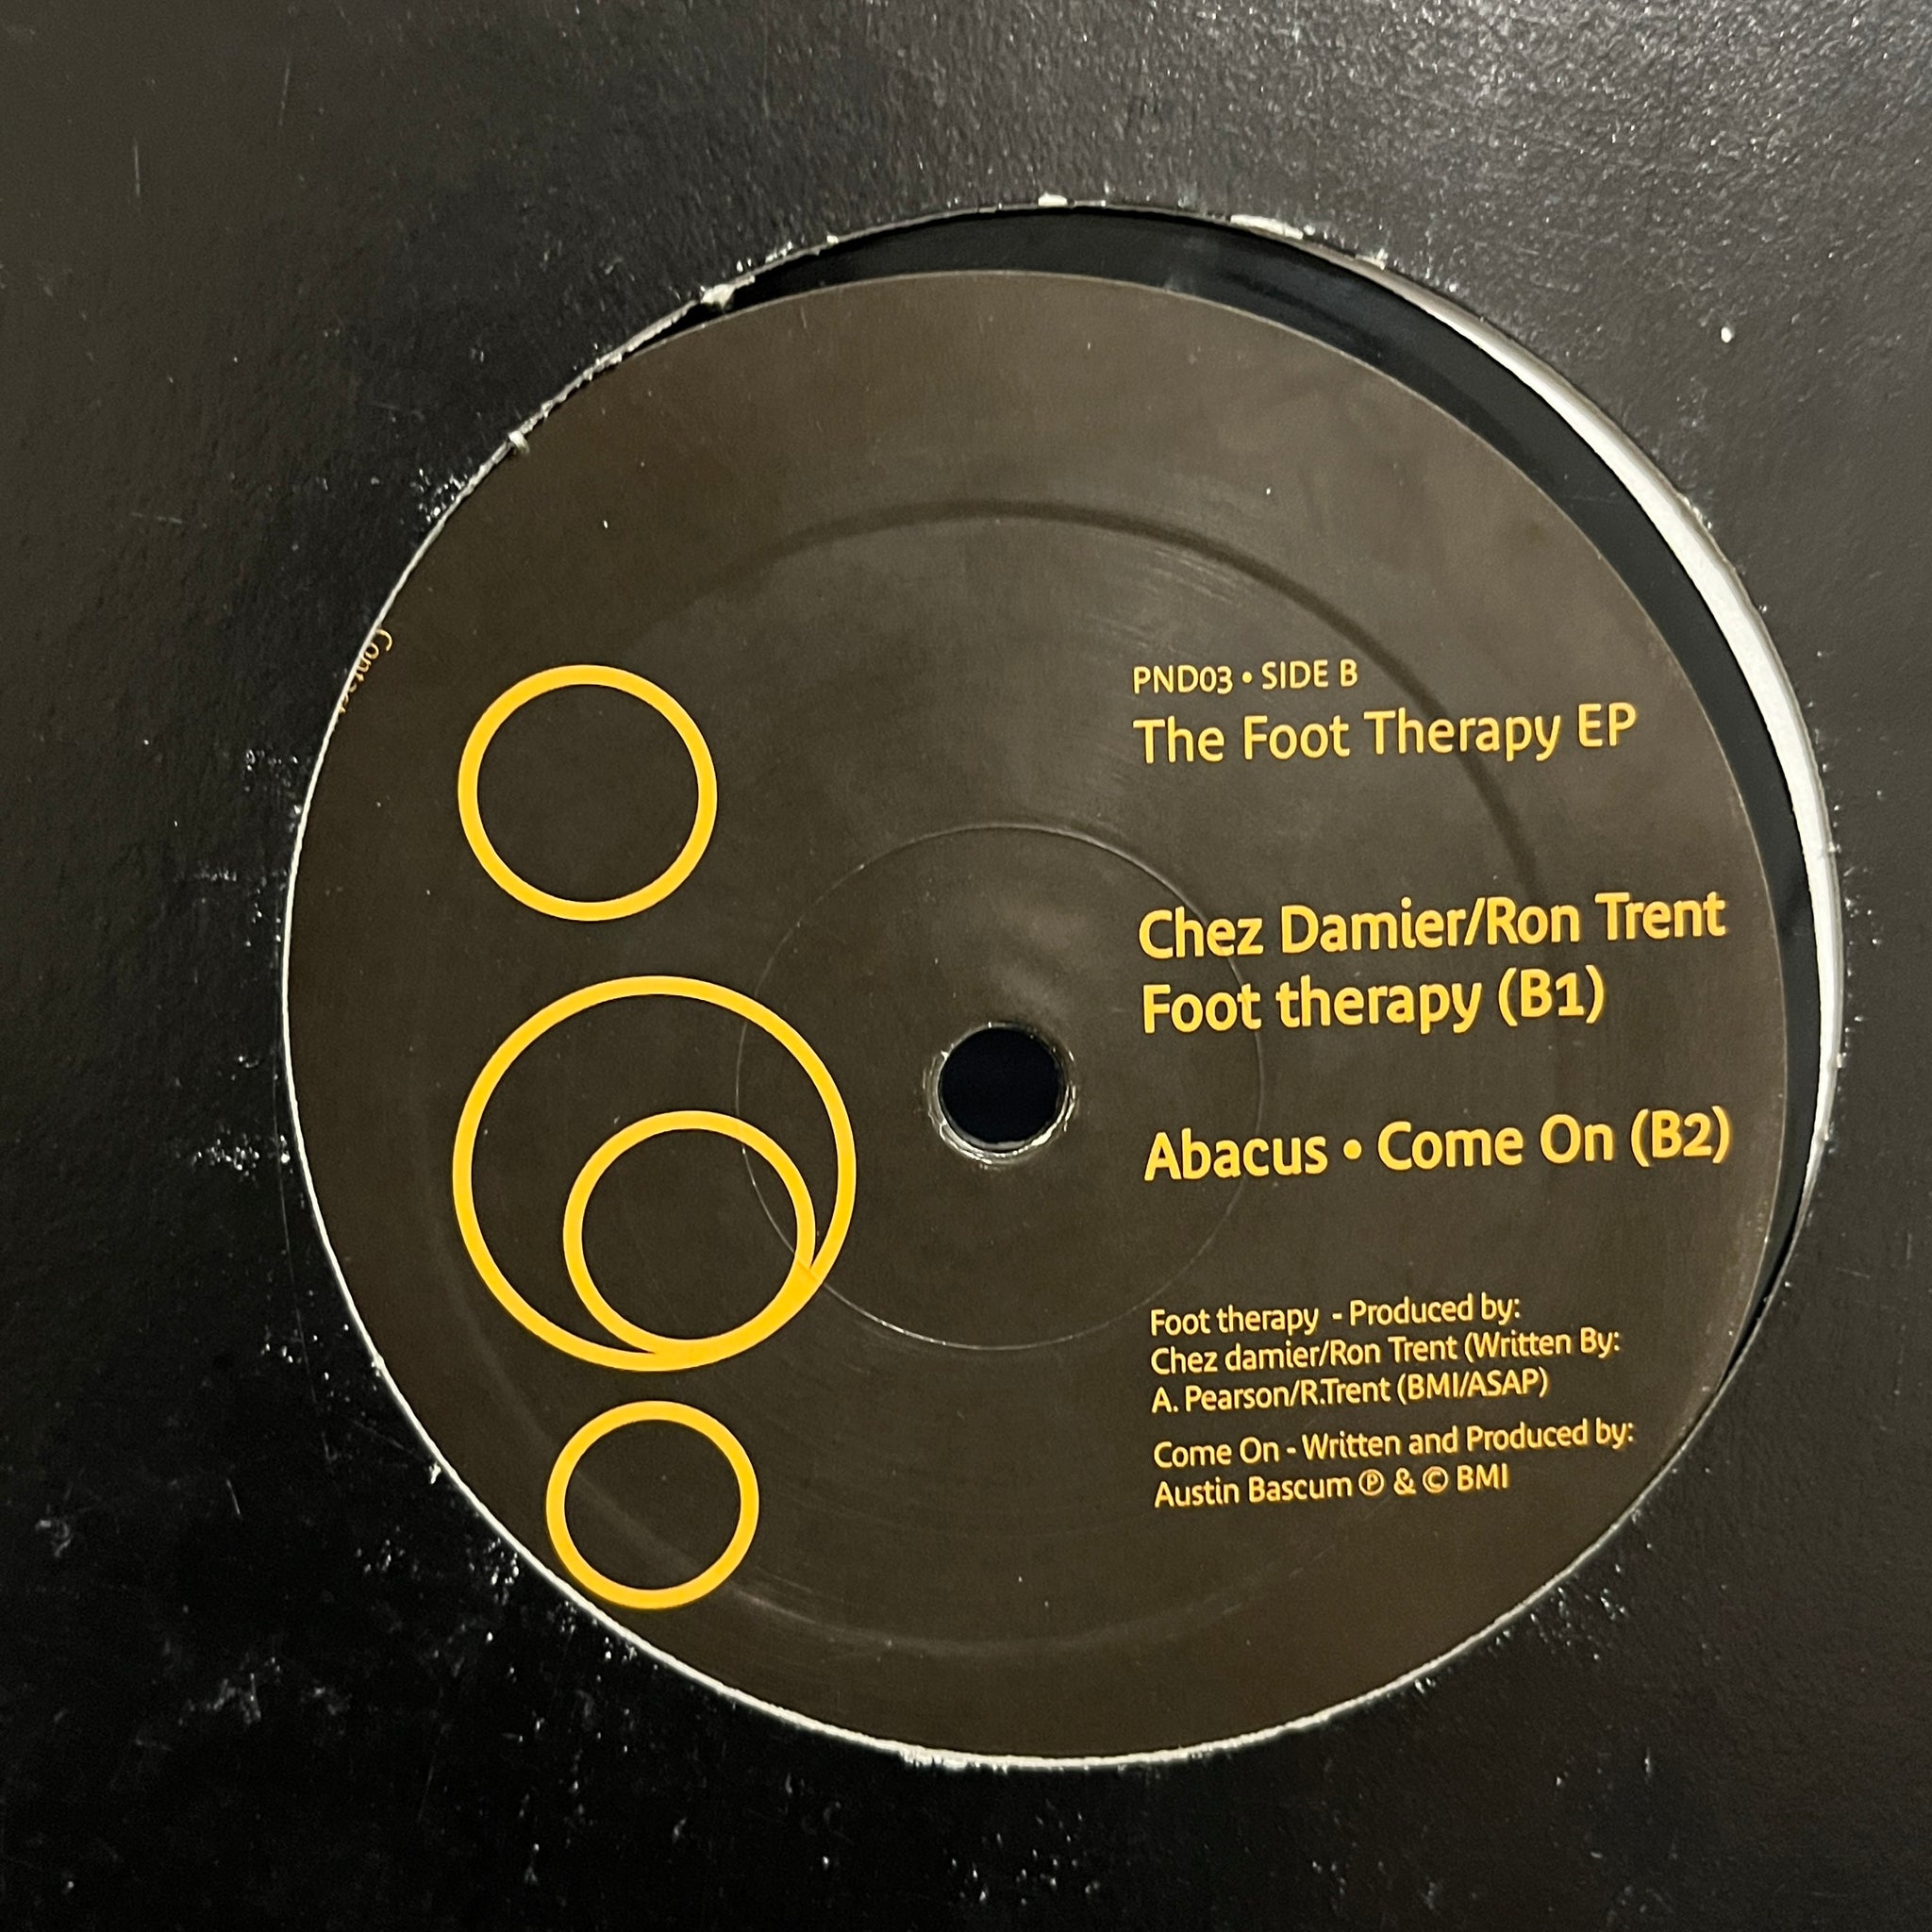 Joshua / Chez Damier / Ron Trent / Abacus – The Foot Therapy EP